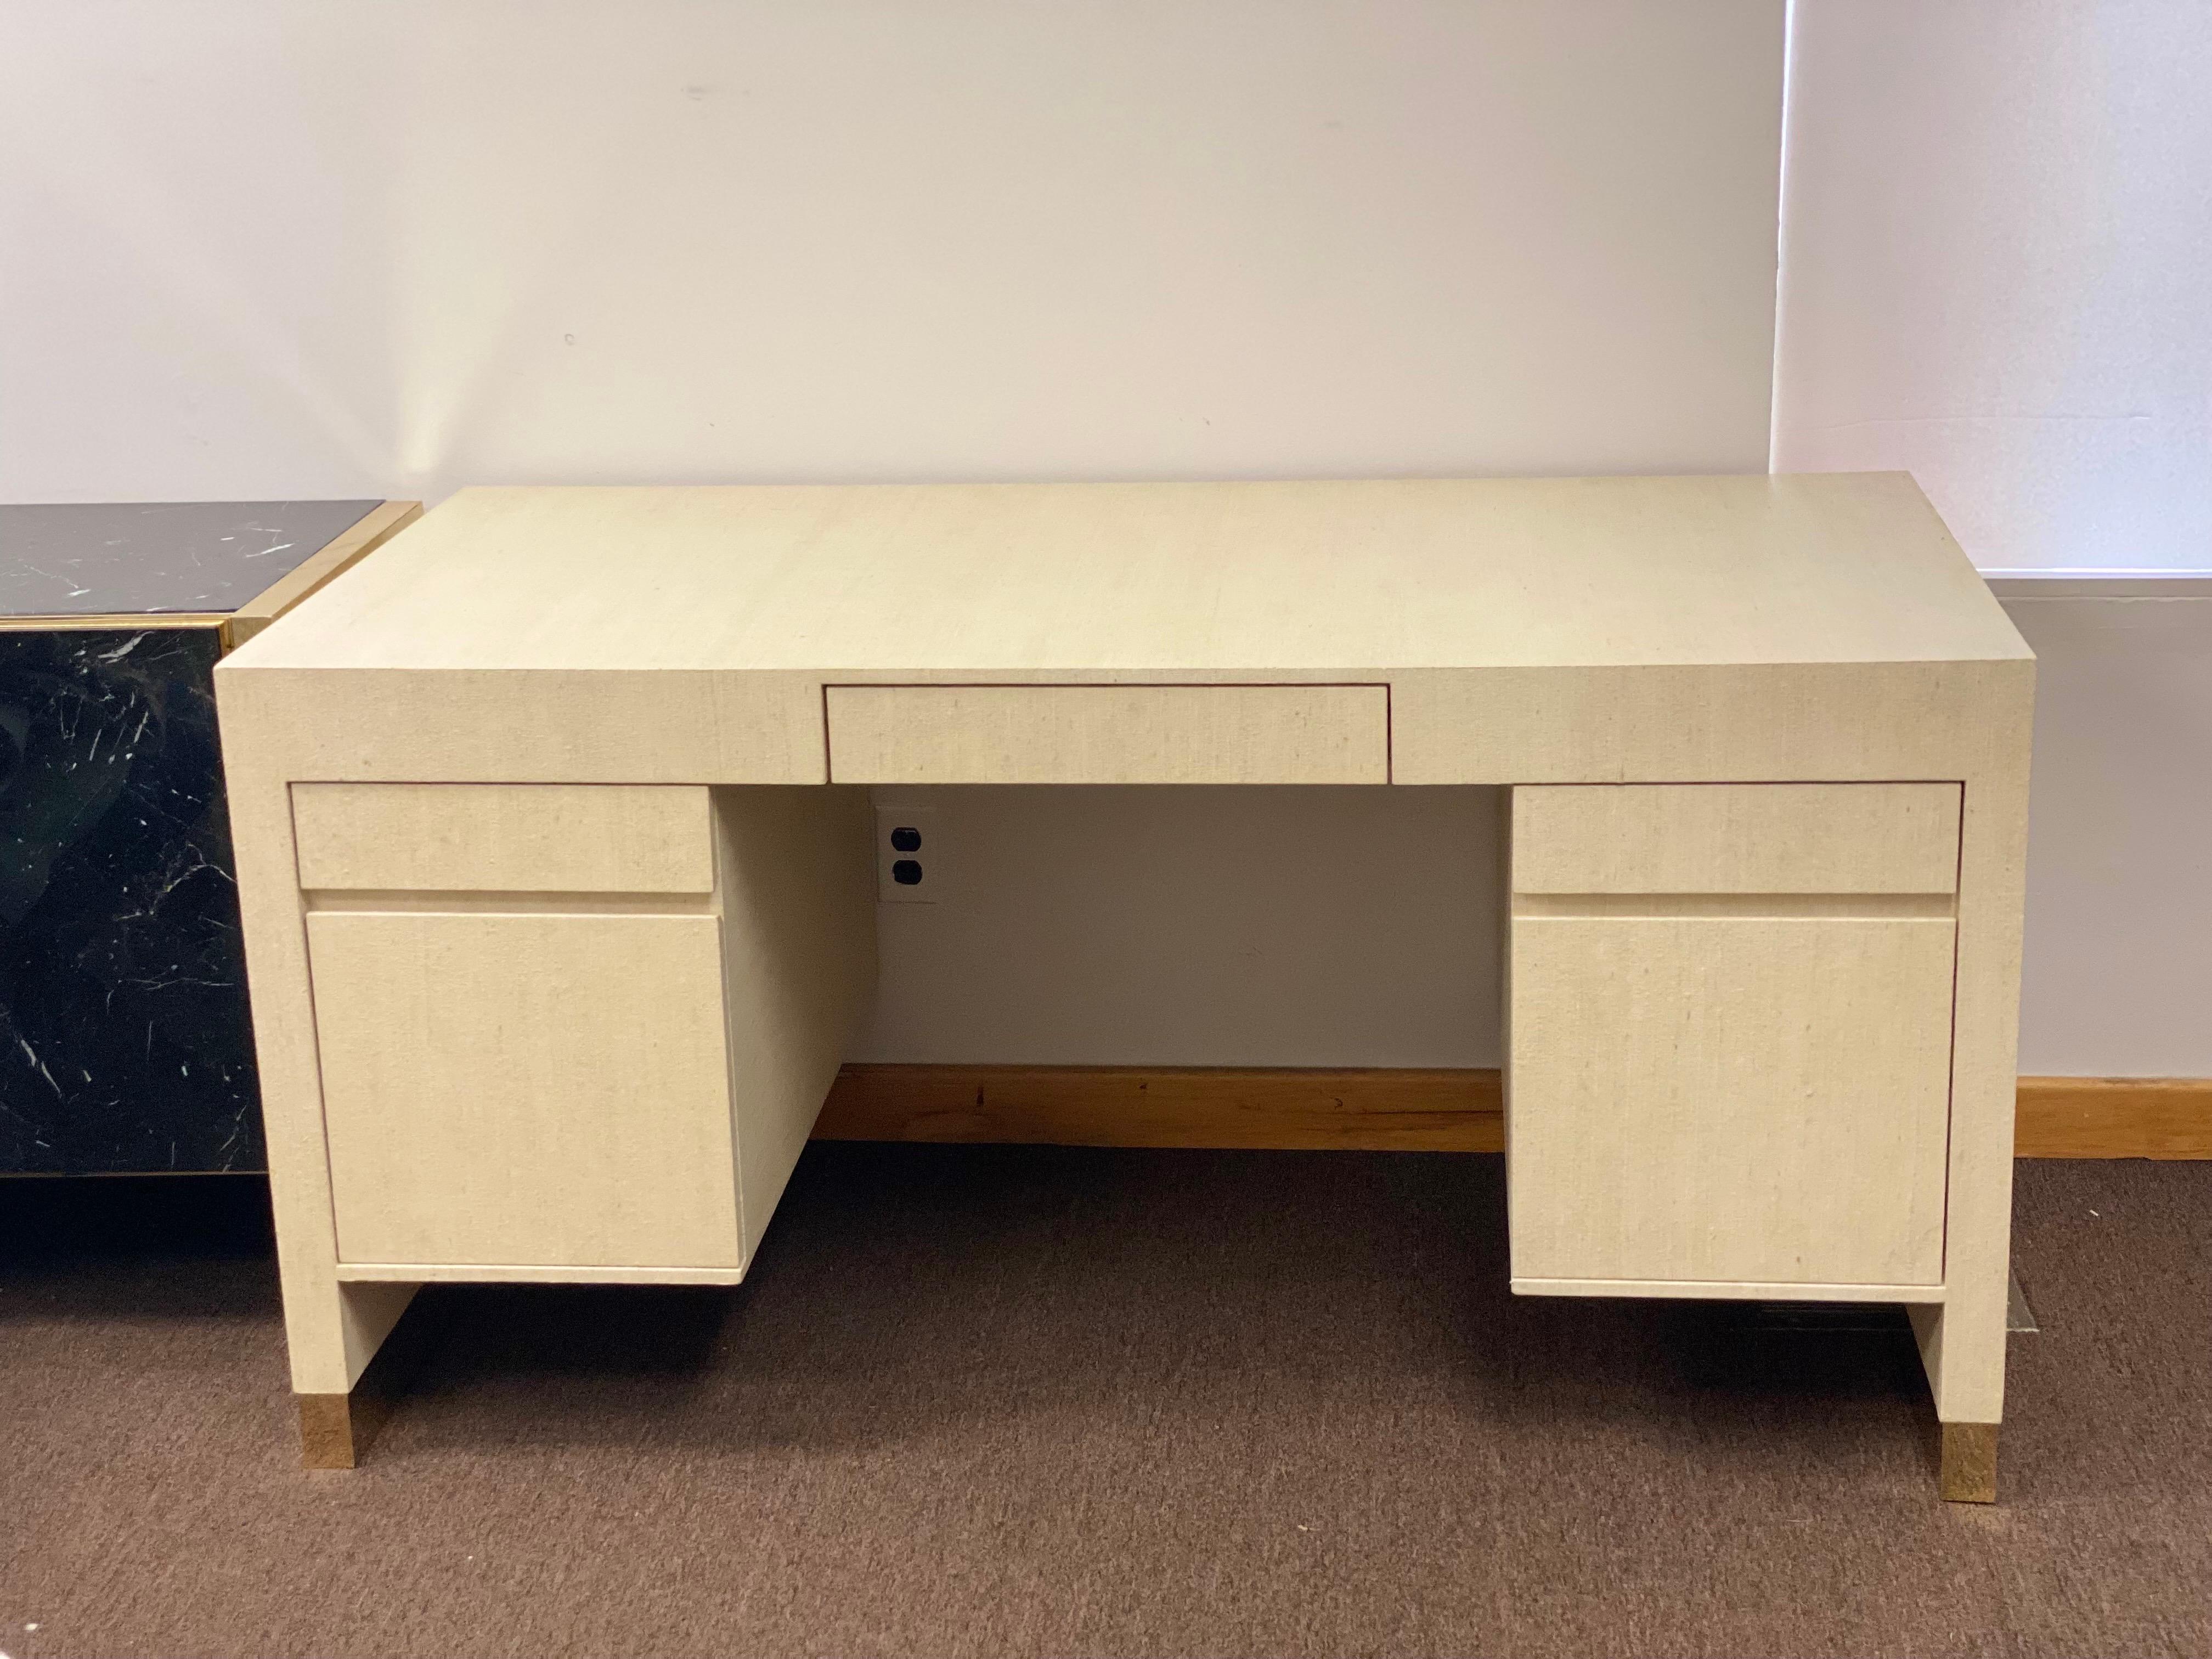 We are very pleased to offer a fabulous pedestal desk attributed to Harrison Van Horn, circa the 1980s. Get down to seriously chic business with this beautiful desk made of hardwood and wrapped in layers of natural grass cloth. Due to the natural